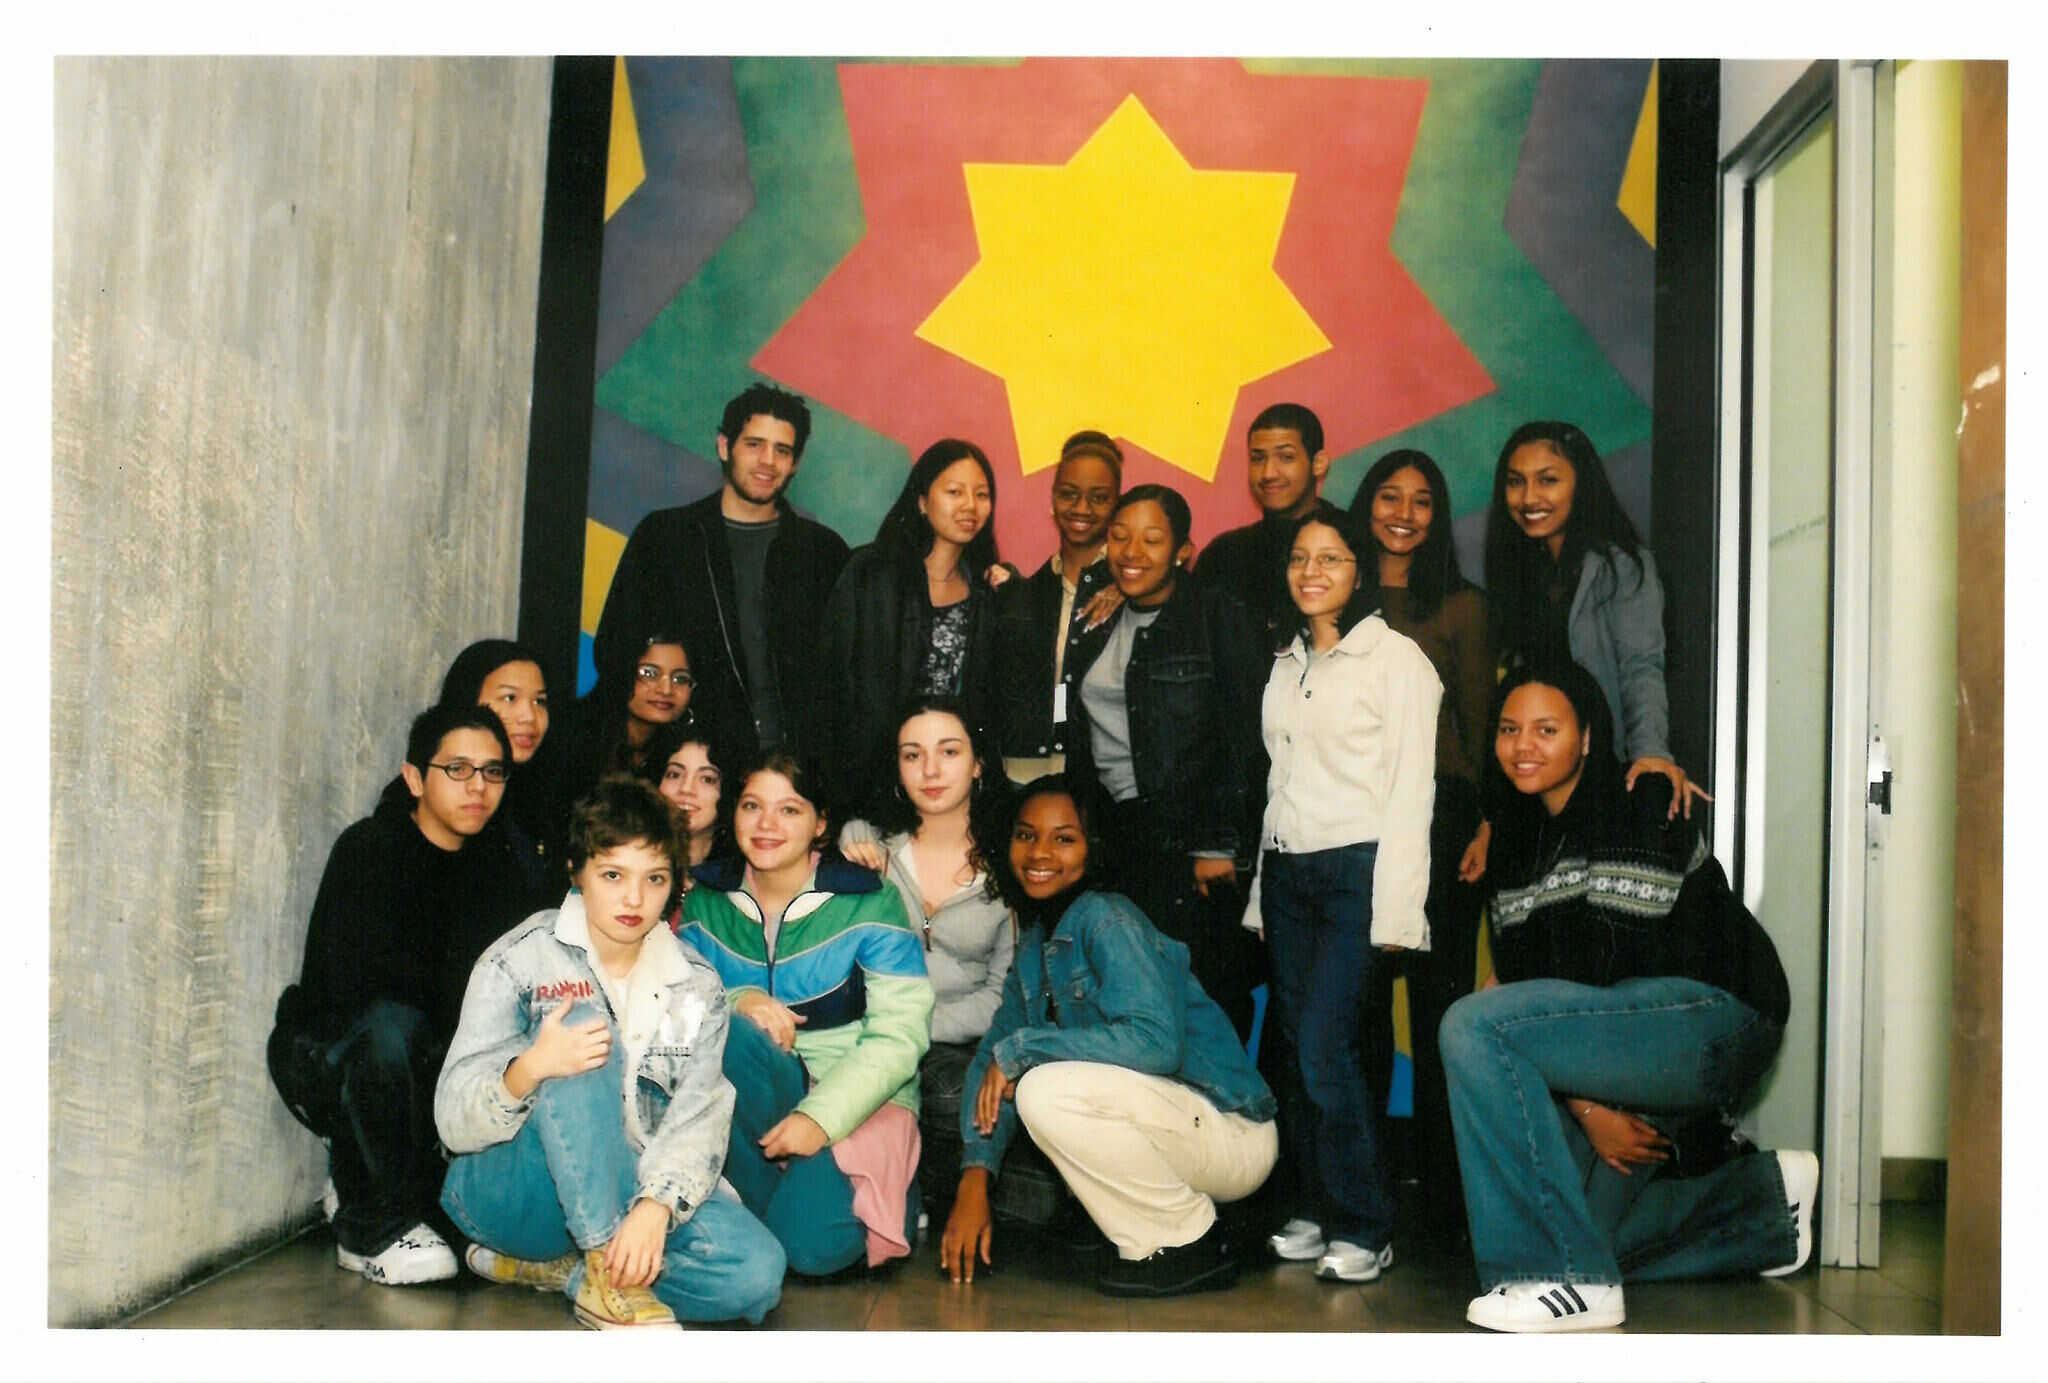 Group photo of Youth Insight Participants at the Whitney Museum in 2001-2002.